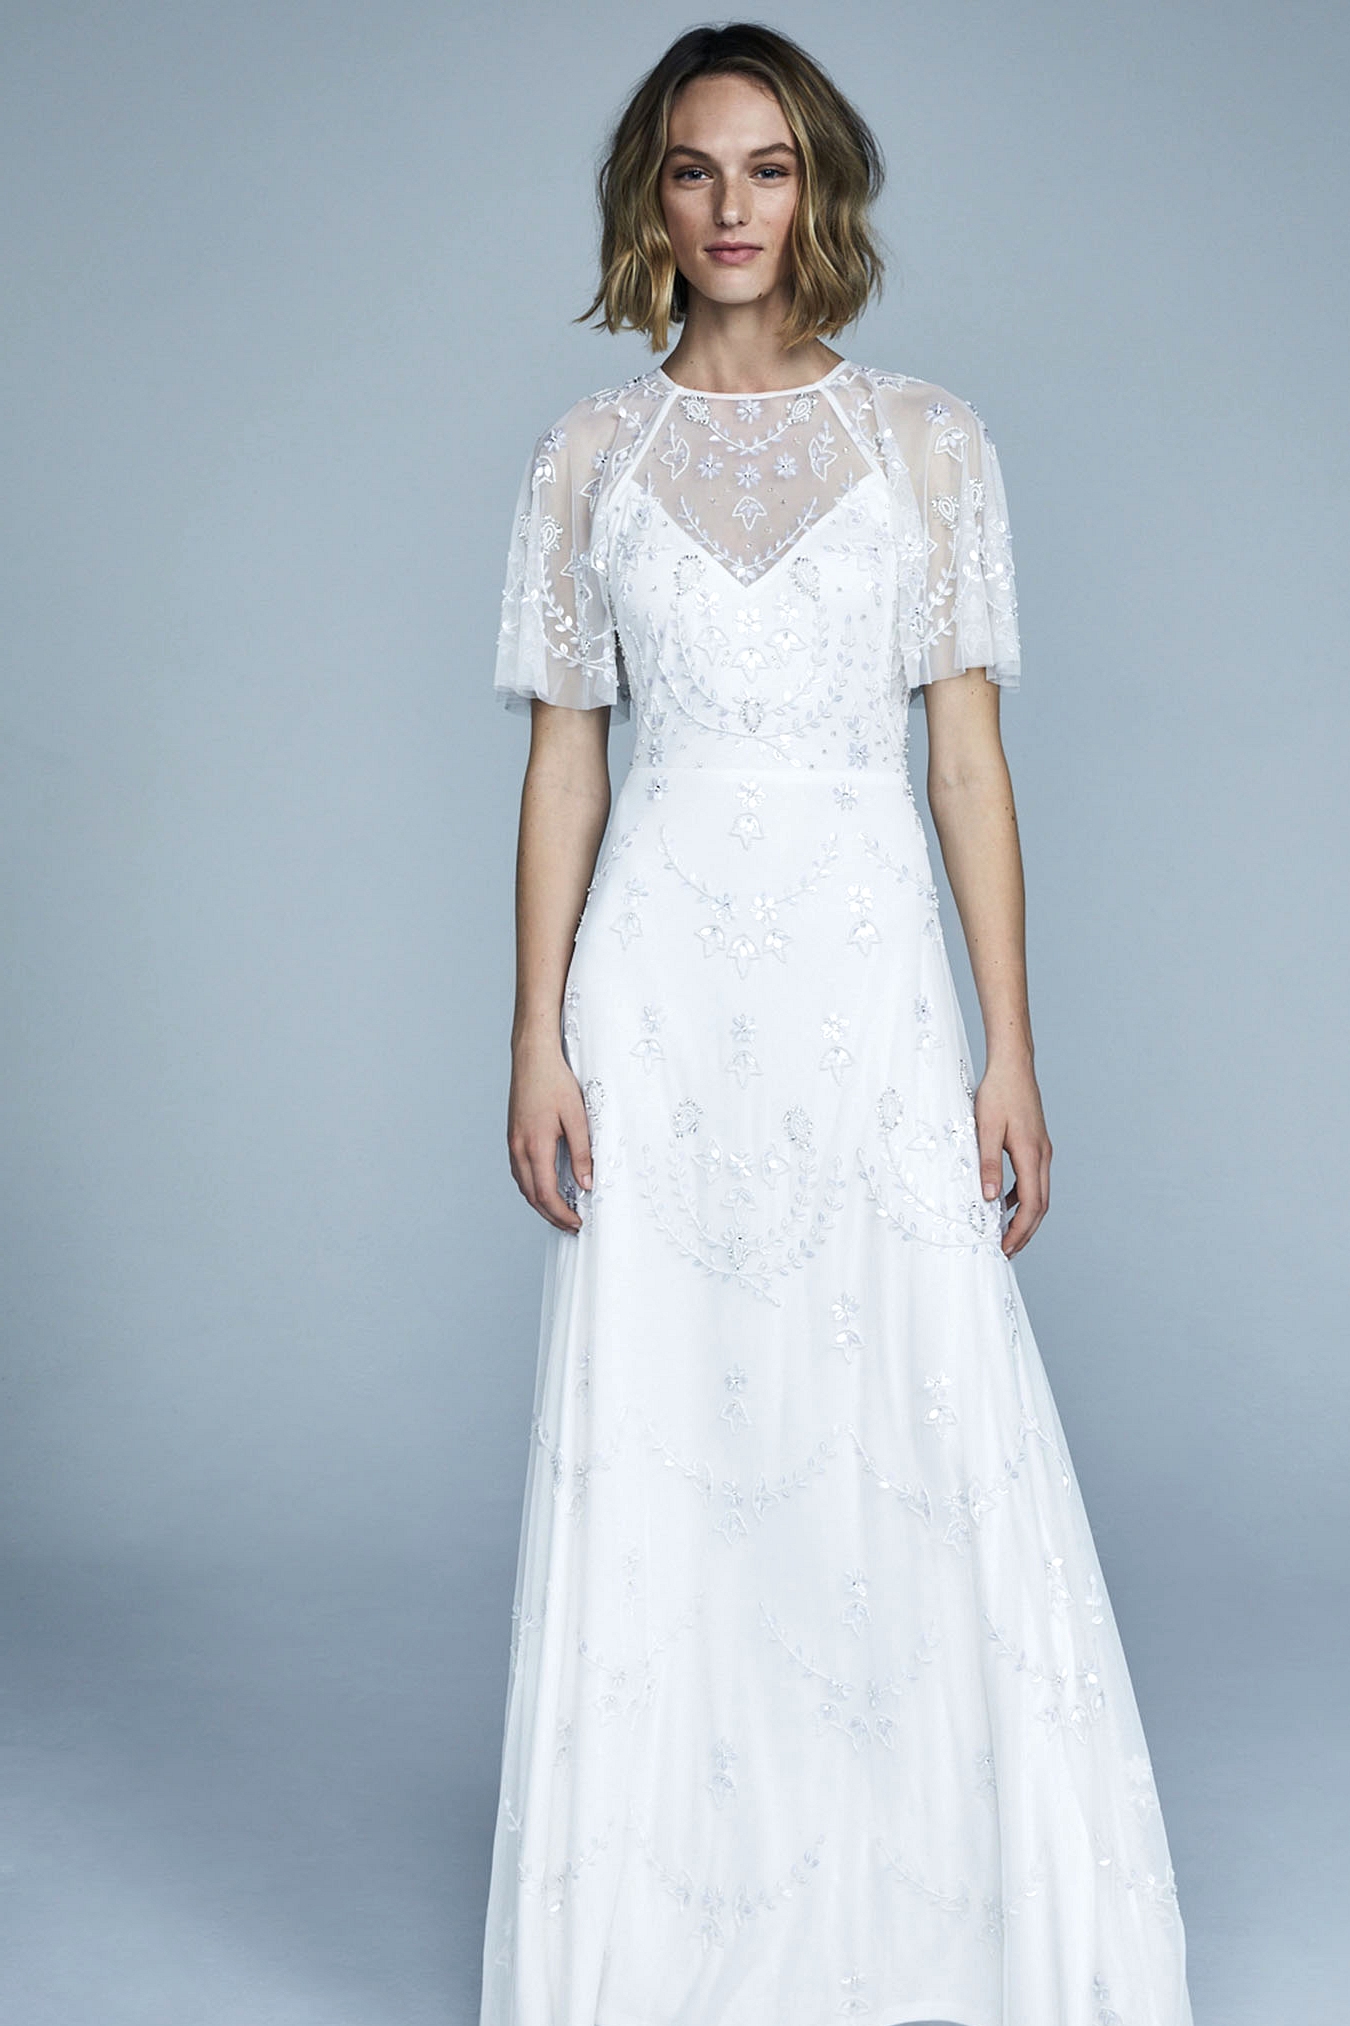 The New 2021 Vow'd Wedding Dresses are Versatile + Affordable - Swanky ...